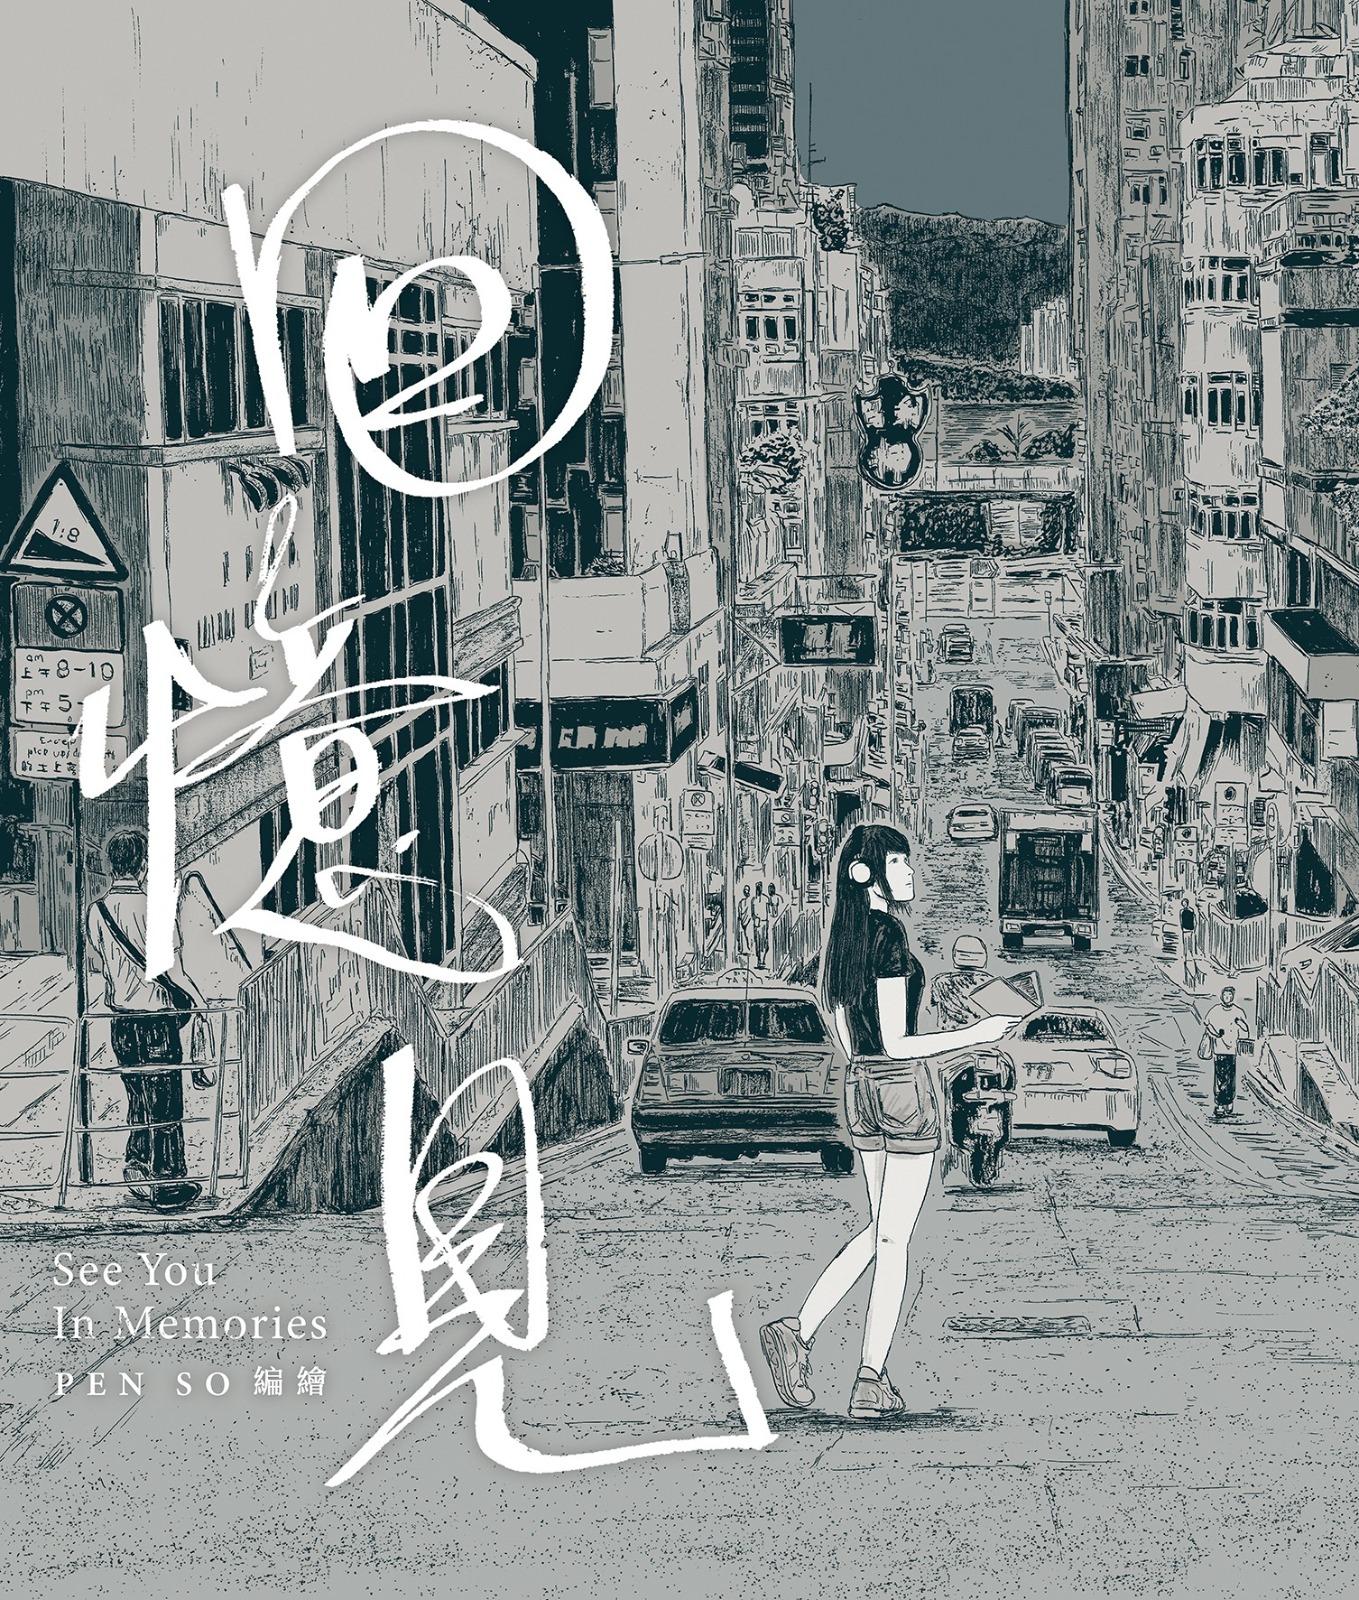 The Secretary for Culture, Sports and Tourism, Mr Kevin Yeung, today (December 22) congratulated Hong Kong comics artist Pen So on claiming the Silver Award at the 16th Japan International MANGA Award with his work, "See You In Memories". Picture shows the comic, "See You In Memories" (Provided by the Hong Kong Comics and Animation Federation).

